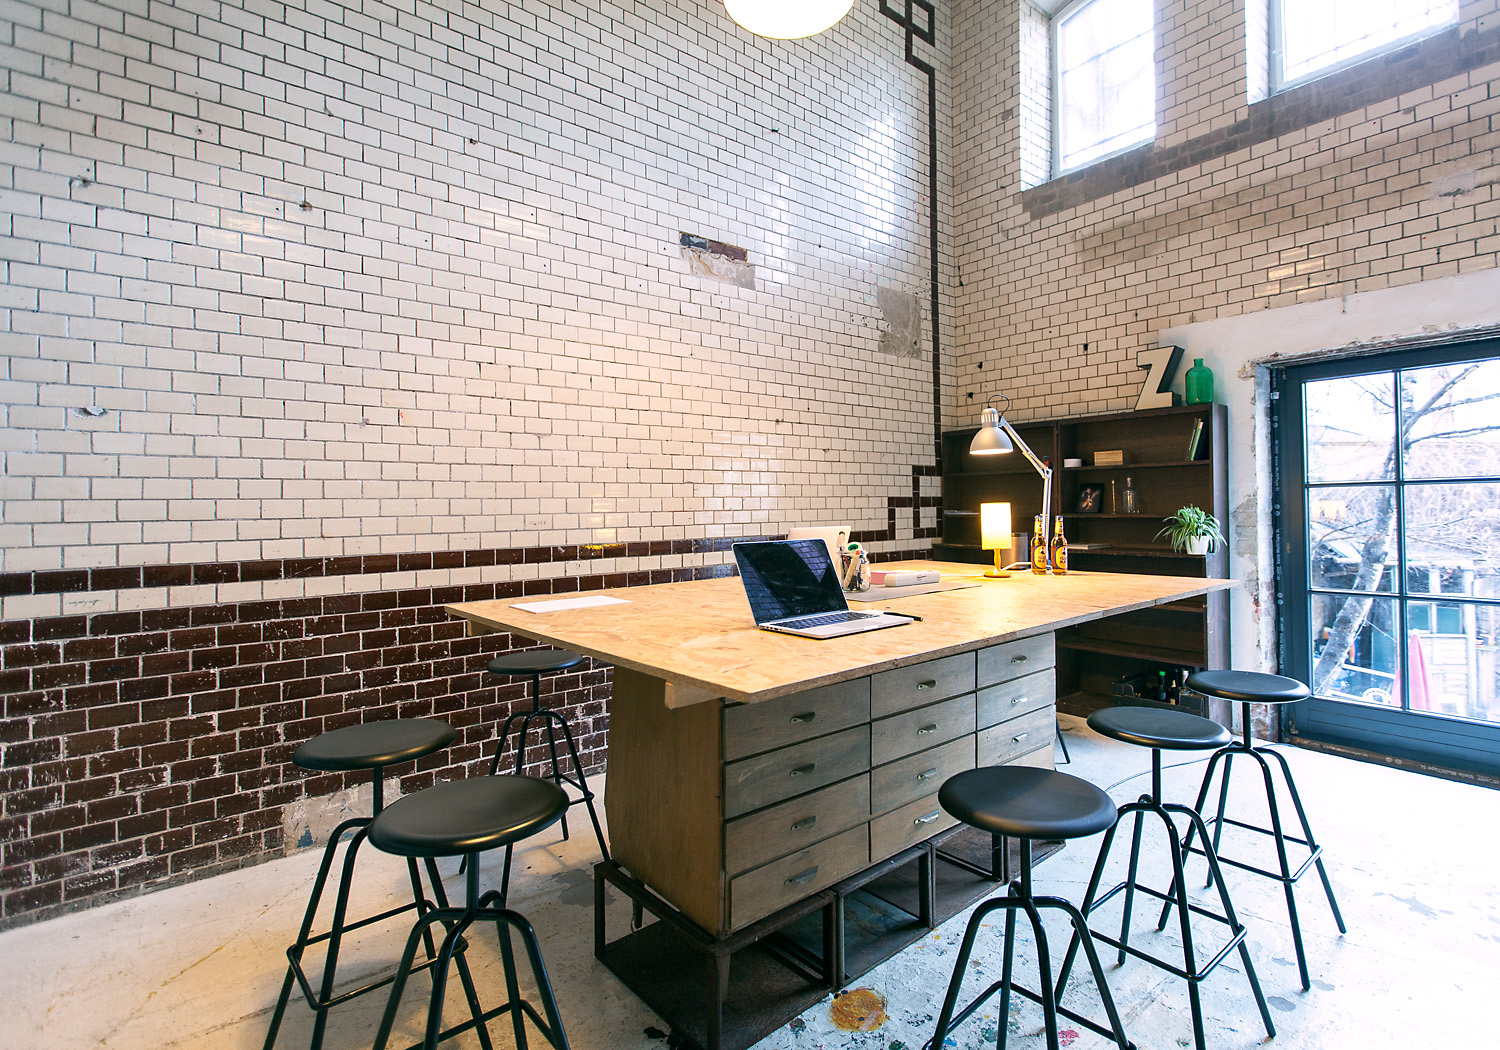 Upper florr of the coworking space showing a high ceiling room with a big shared desk and bar stools